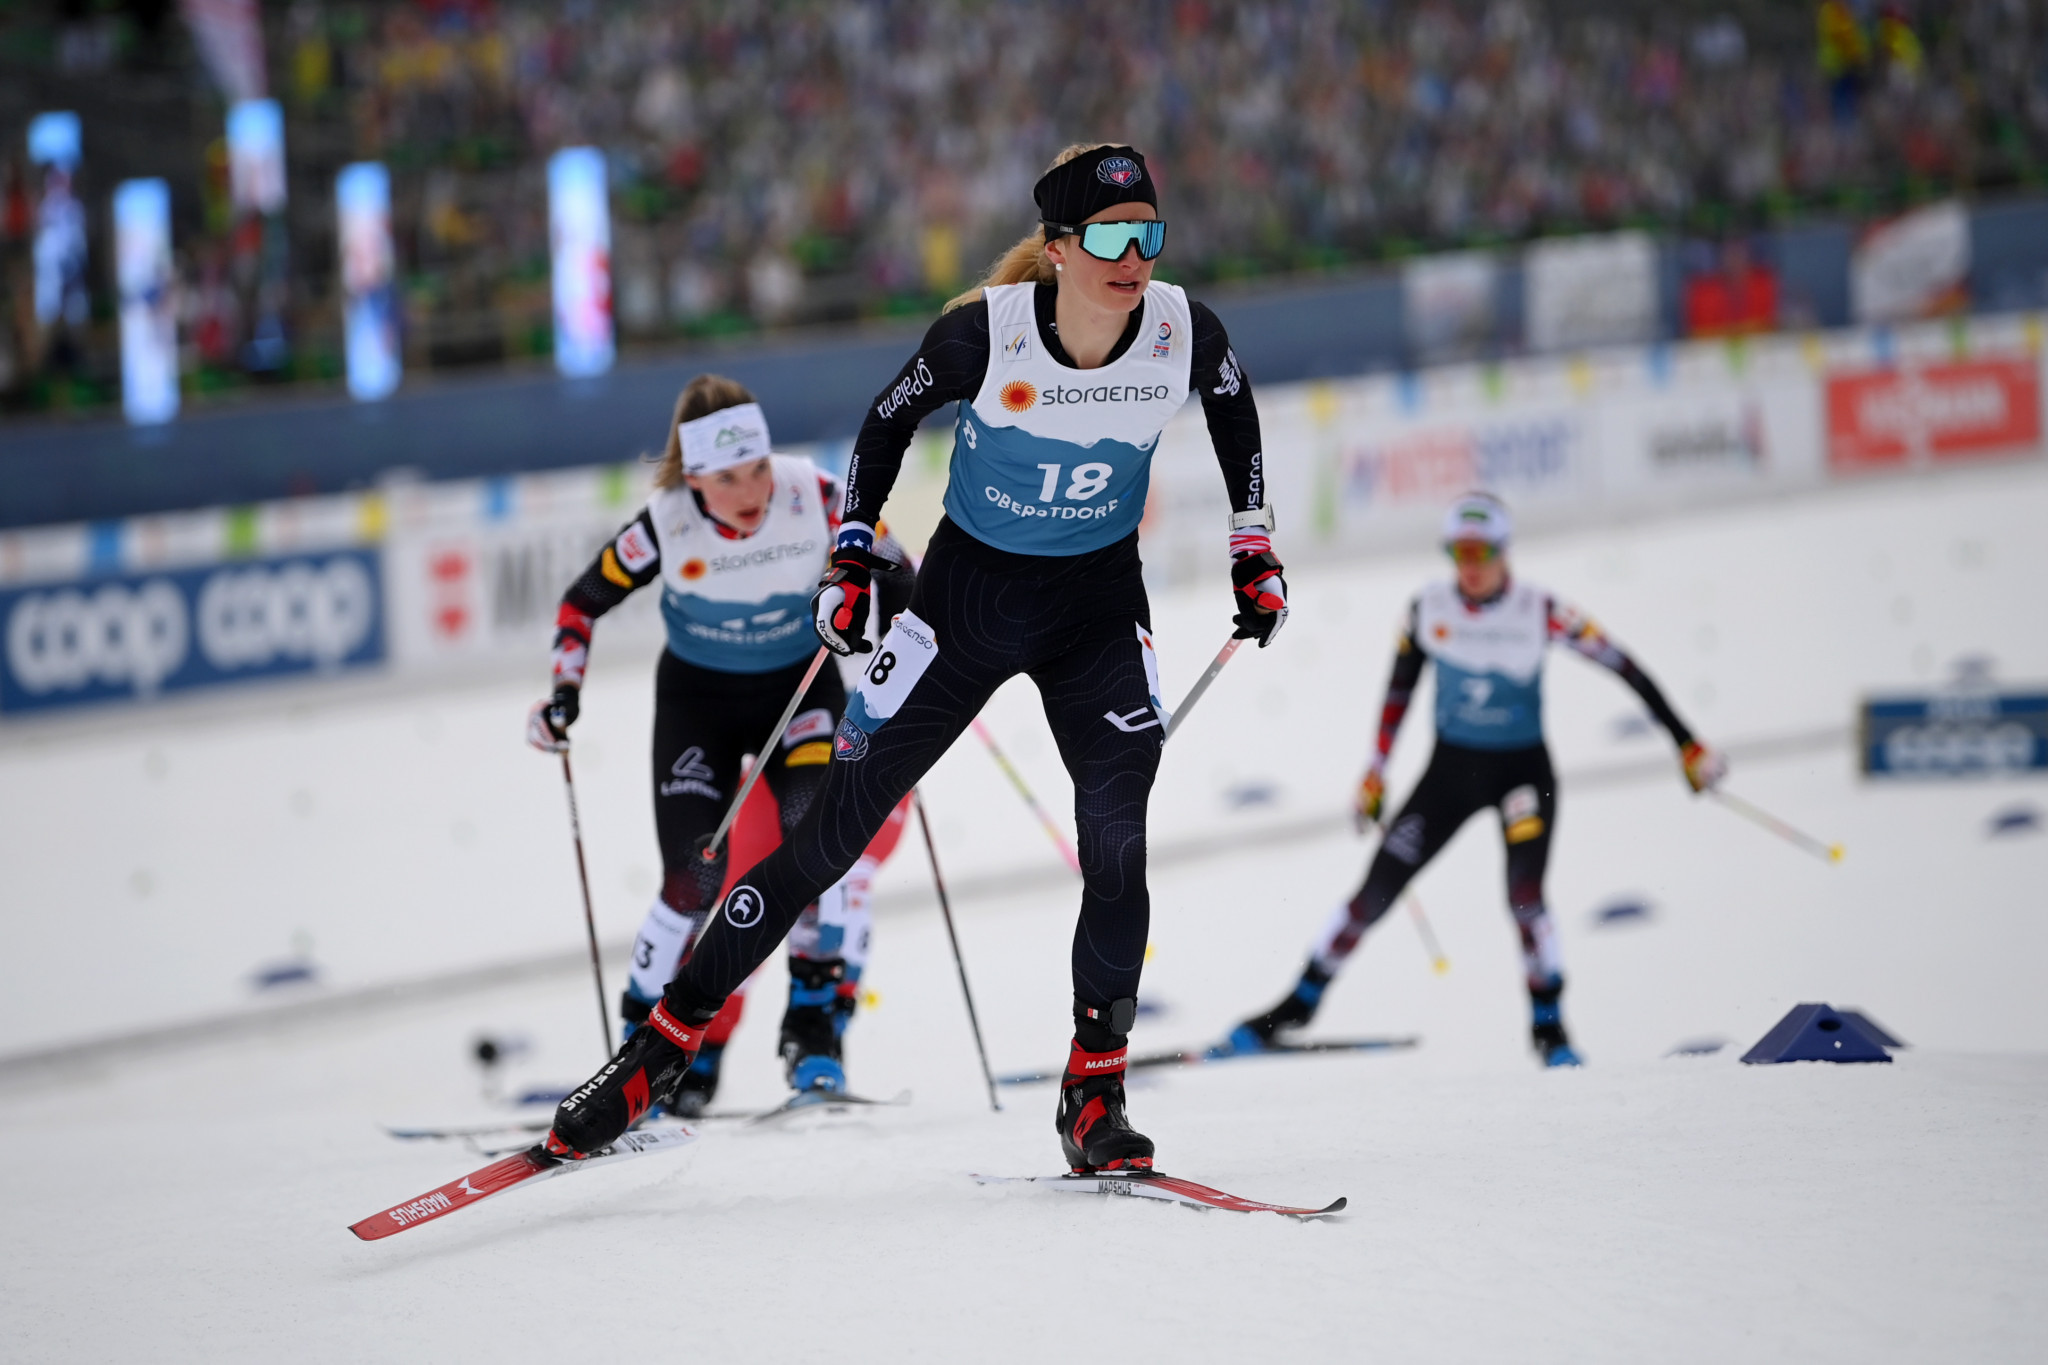 First Women's Nordic Combined crystal globe awarded after curtailed inaugural season